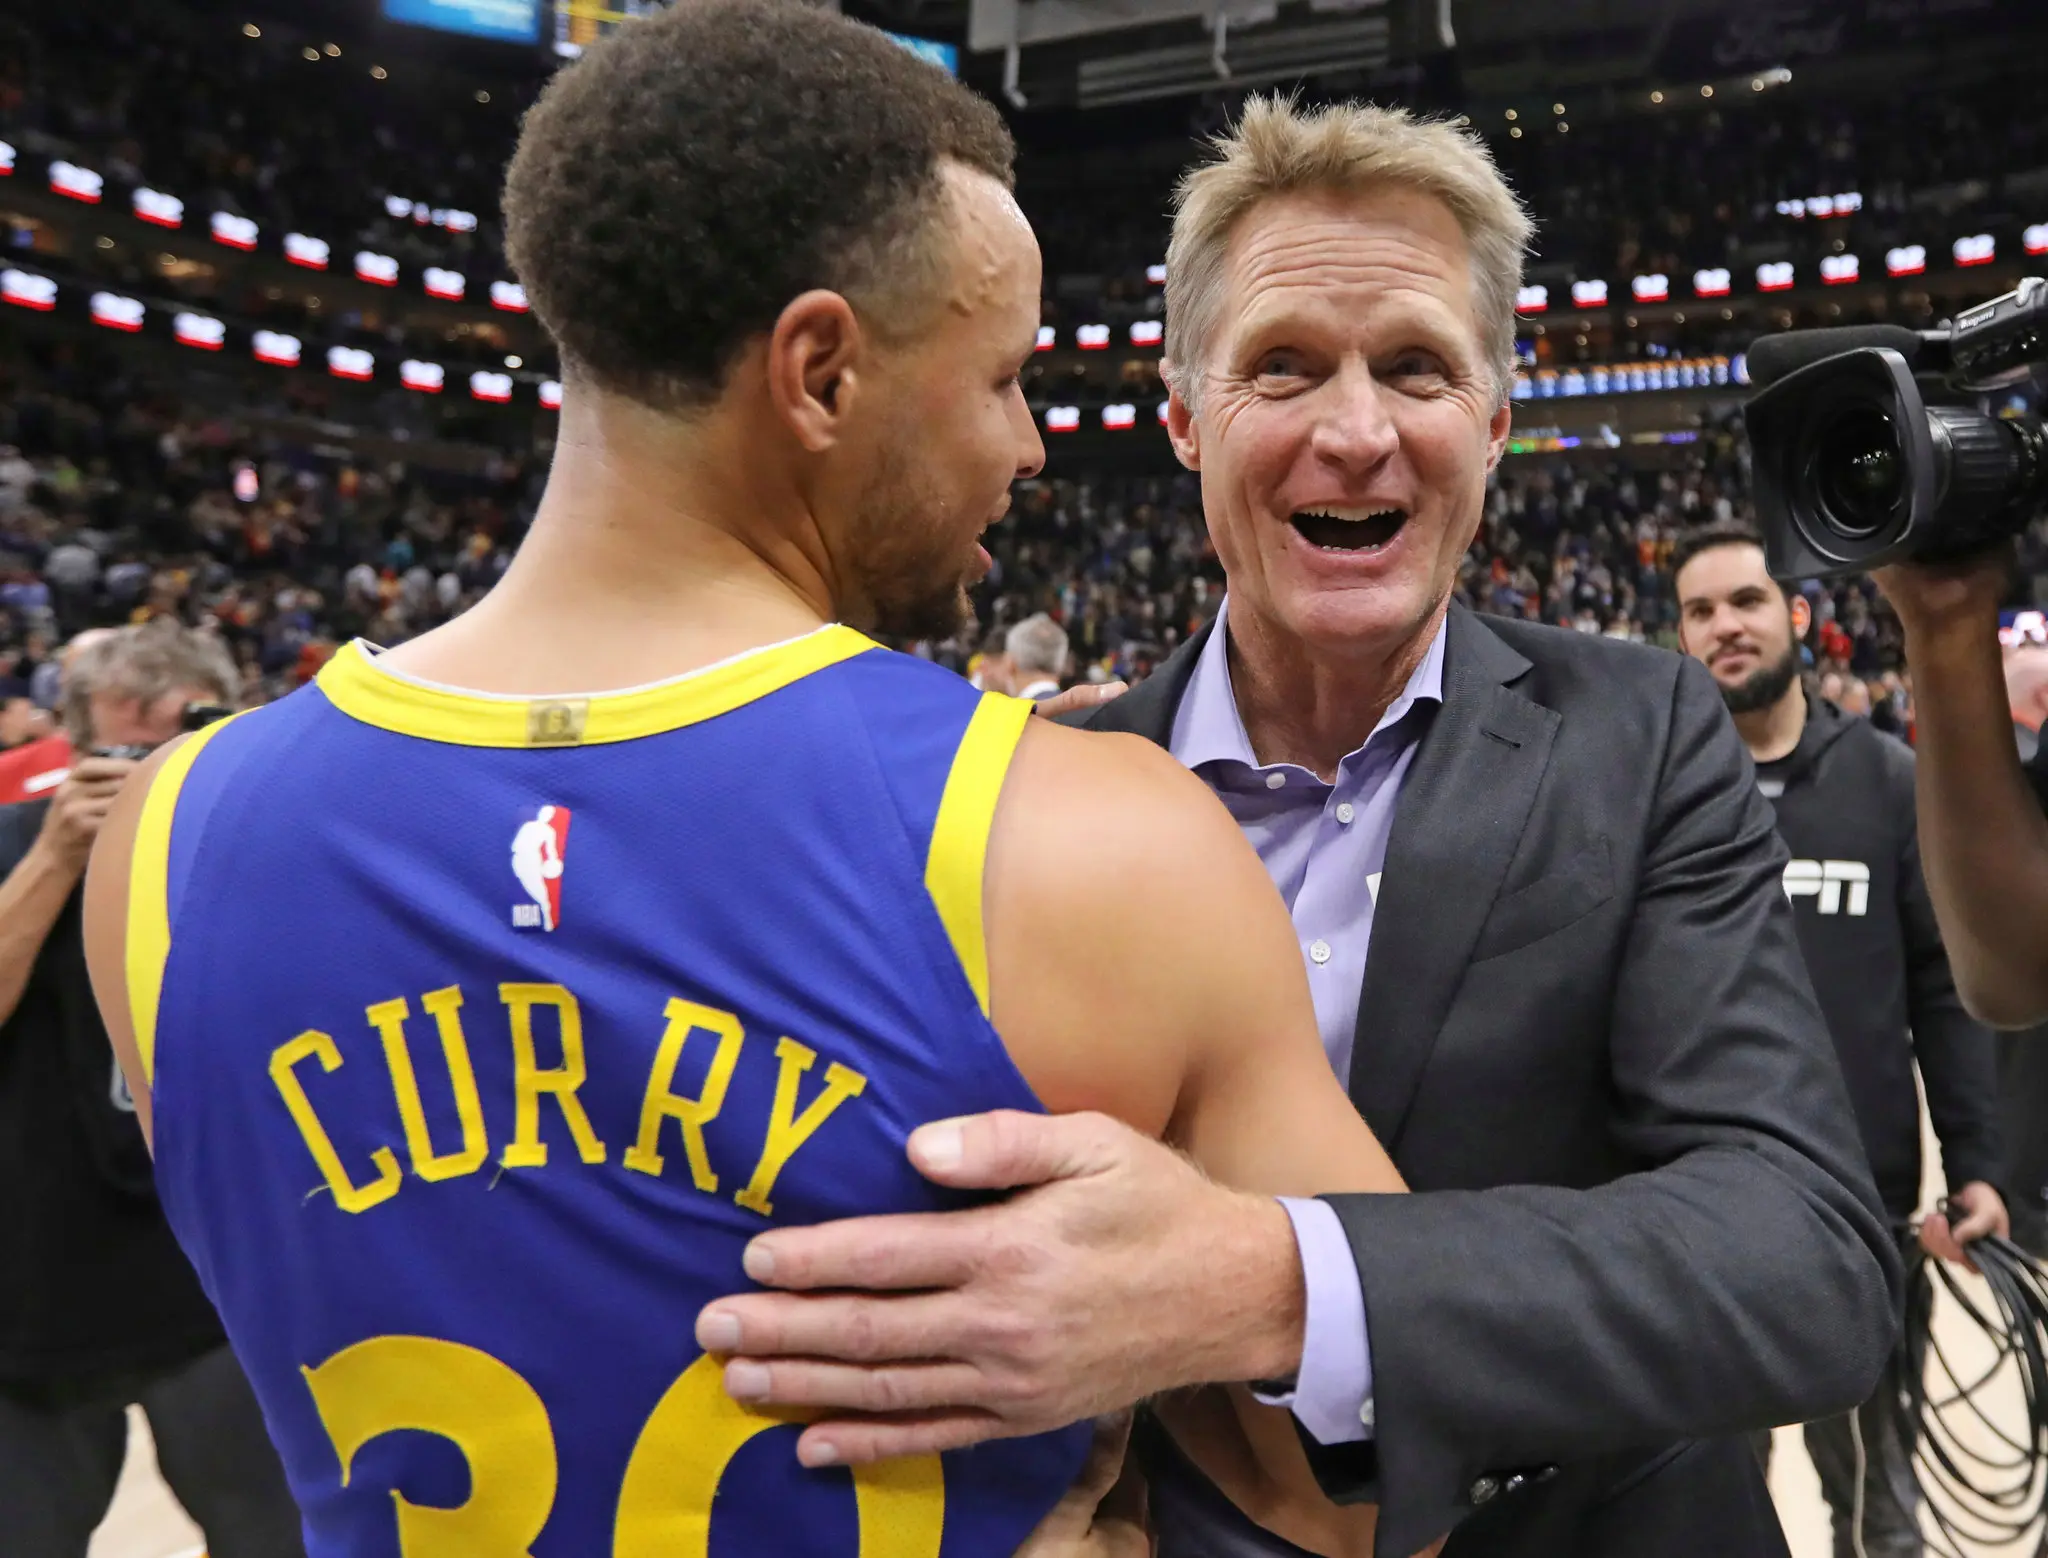 Steve Kerr and Steph Curry having fun while getting it done